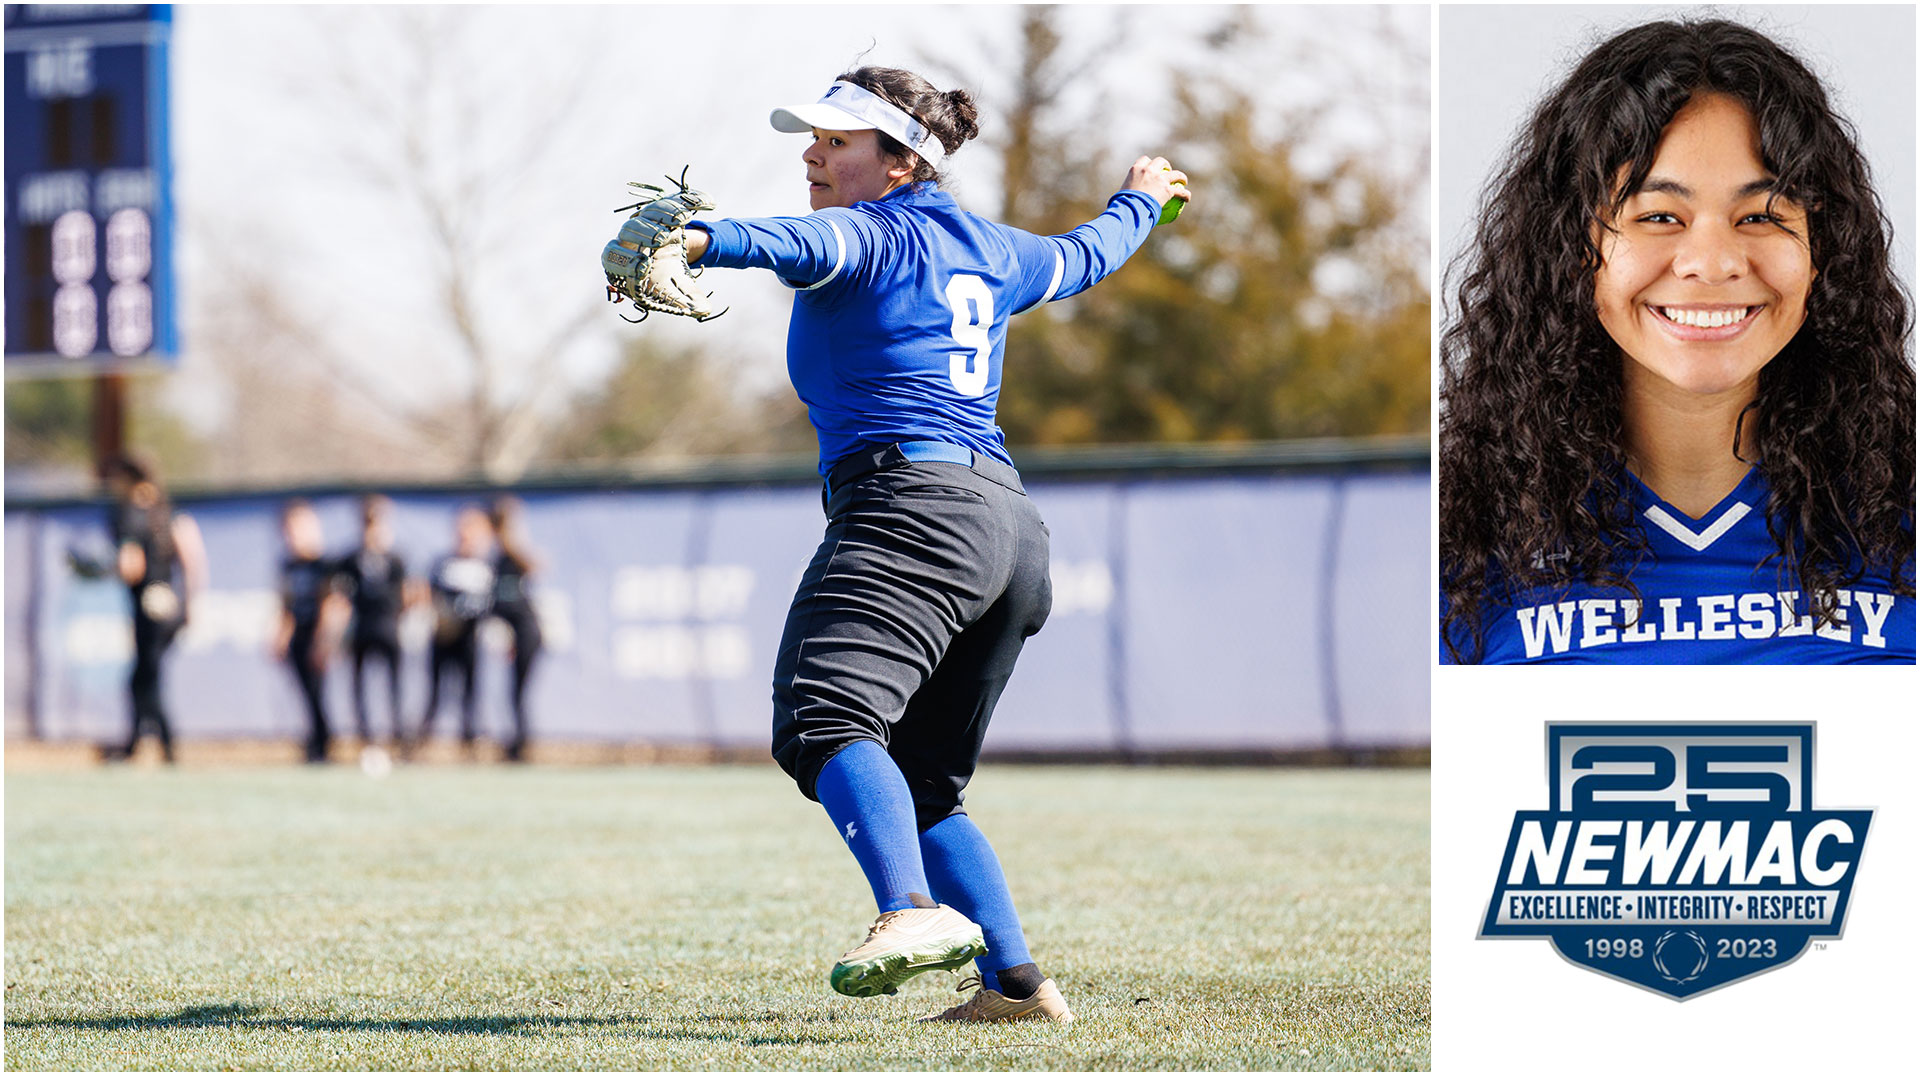 Lauren Young '25 was named the NEWMAC Pitcher of the Week (photos by Frank Poulin)